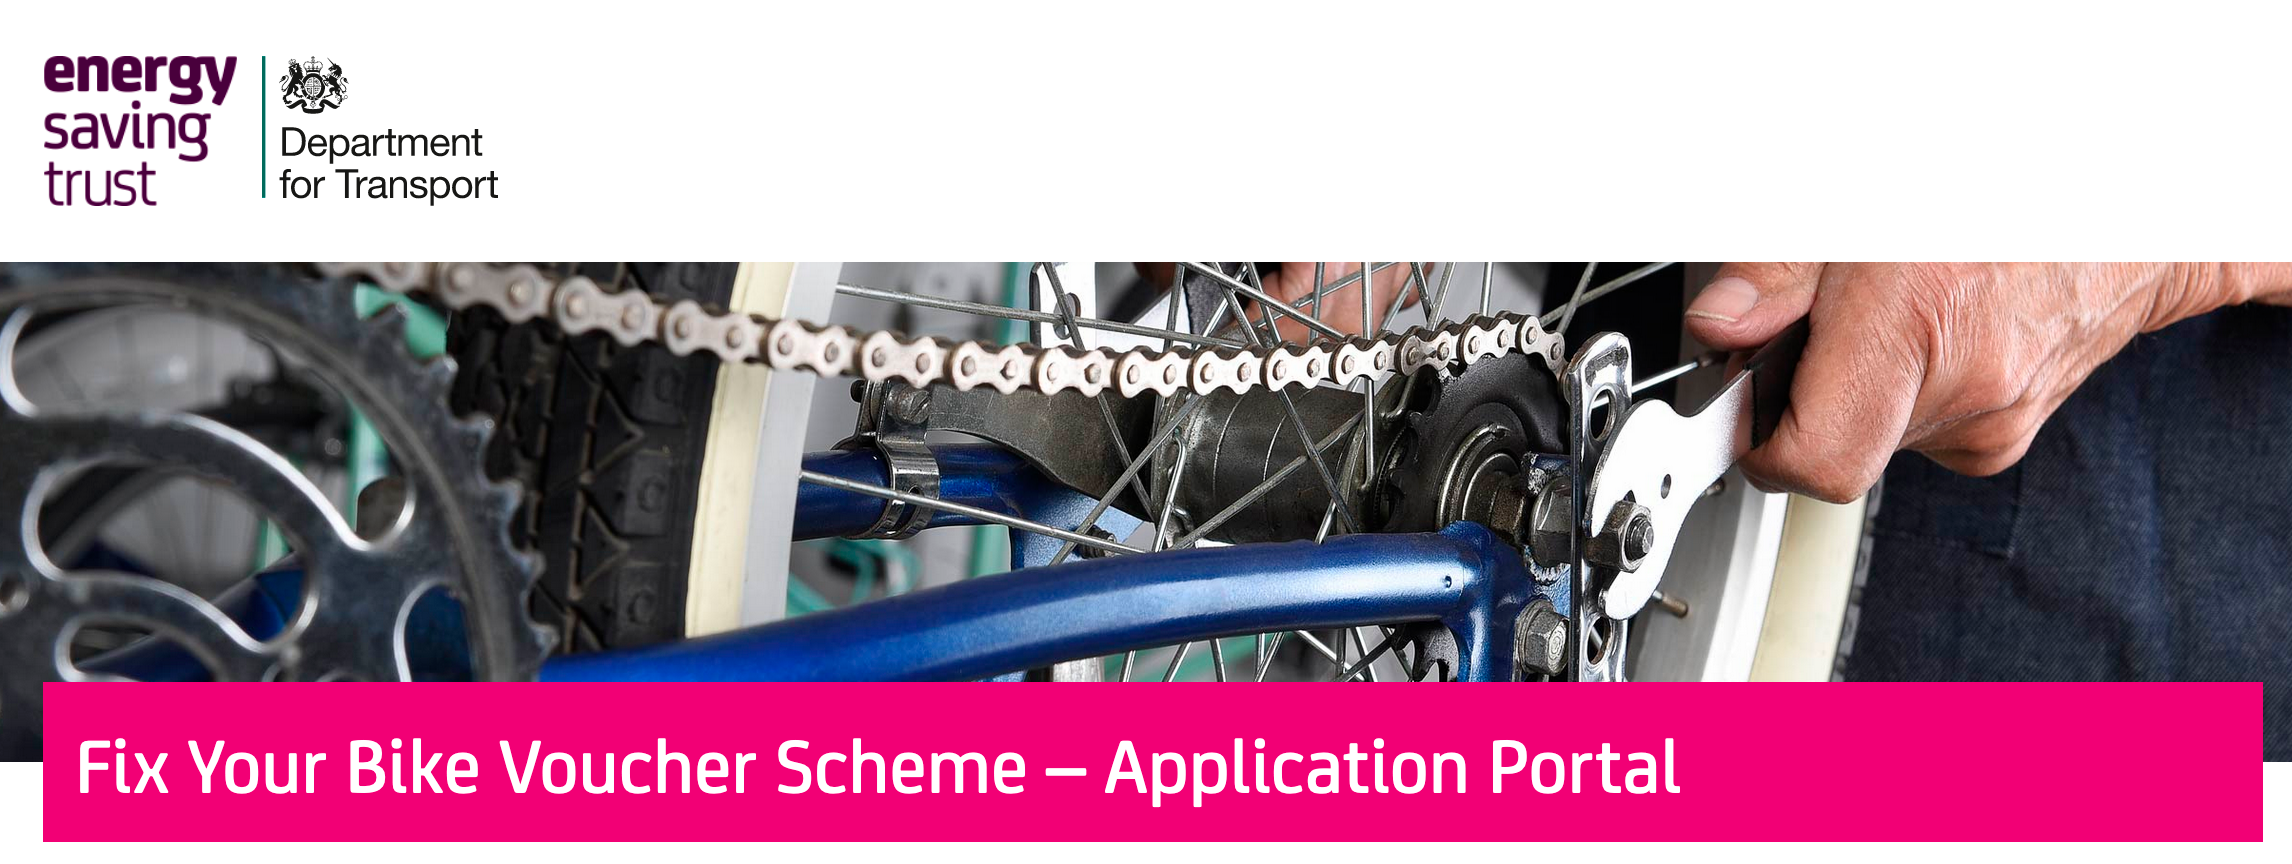 FREE £50 "Fix Your Bike Voucher Scheme" goes live across England in less than 1 hour!